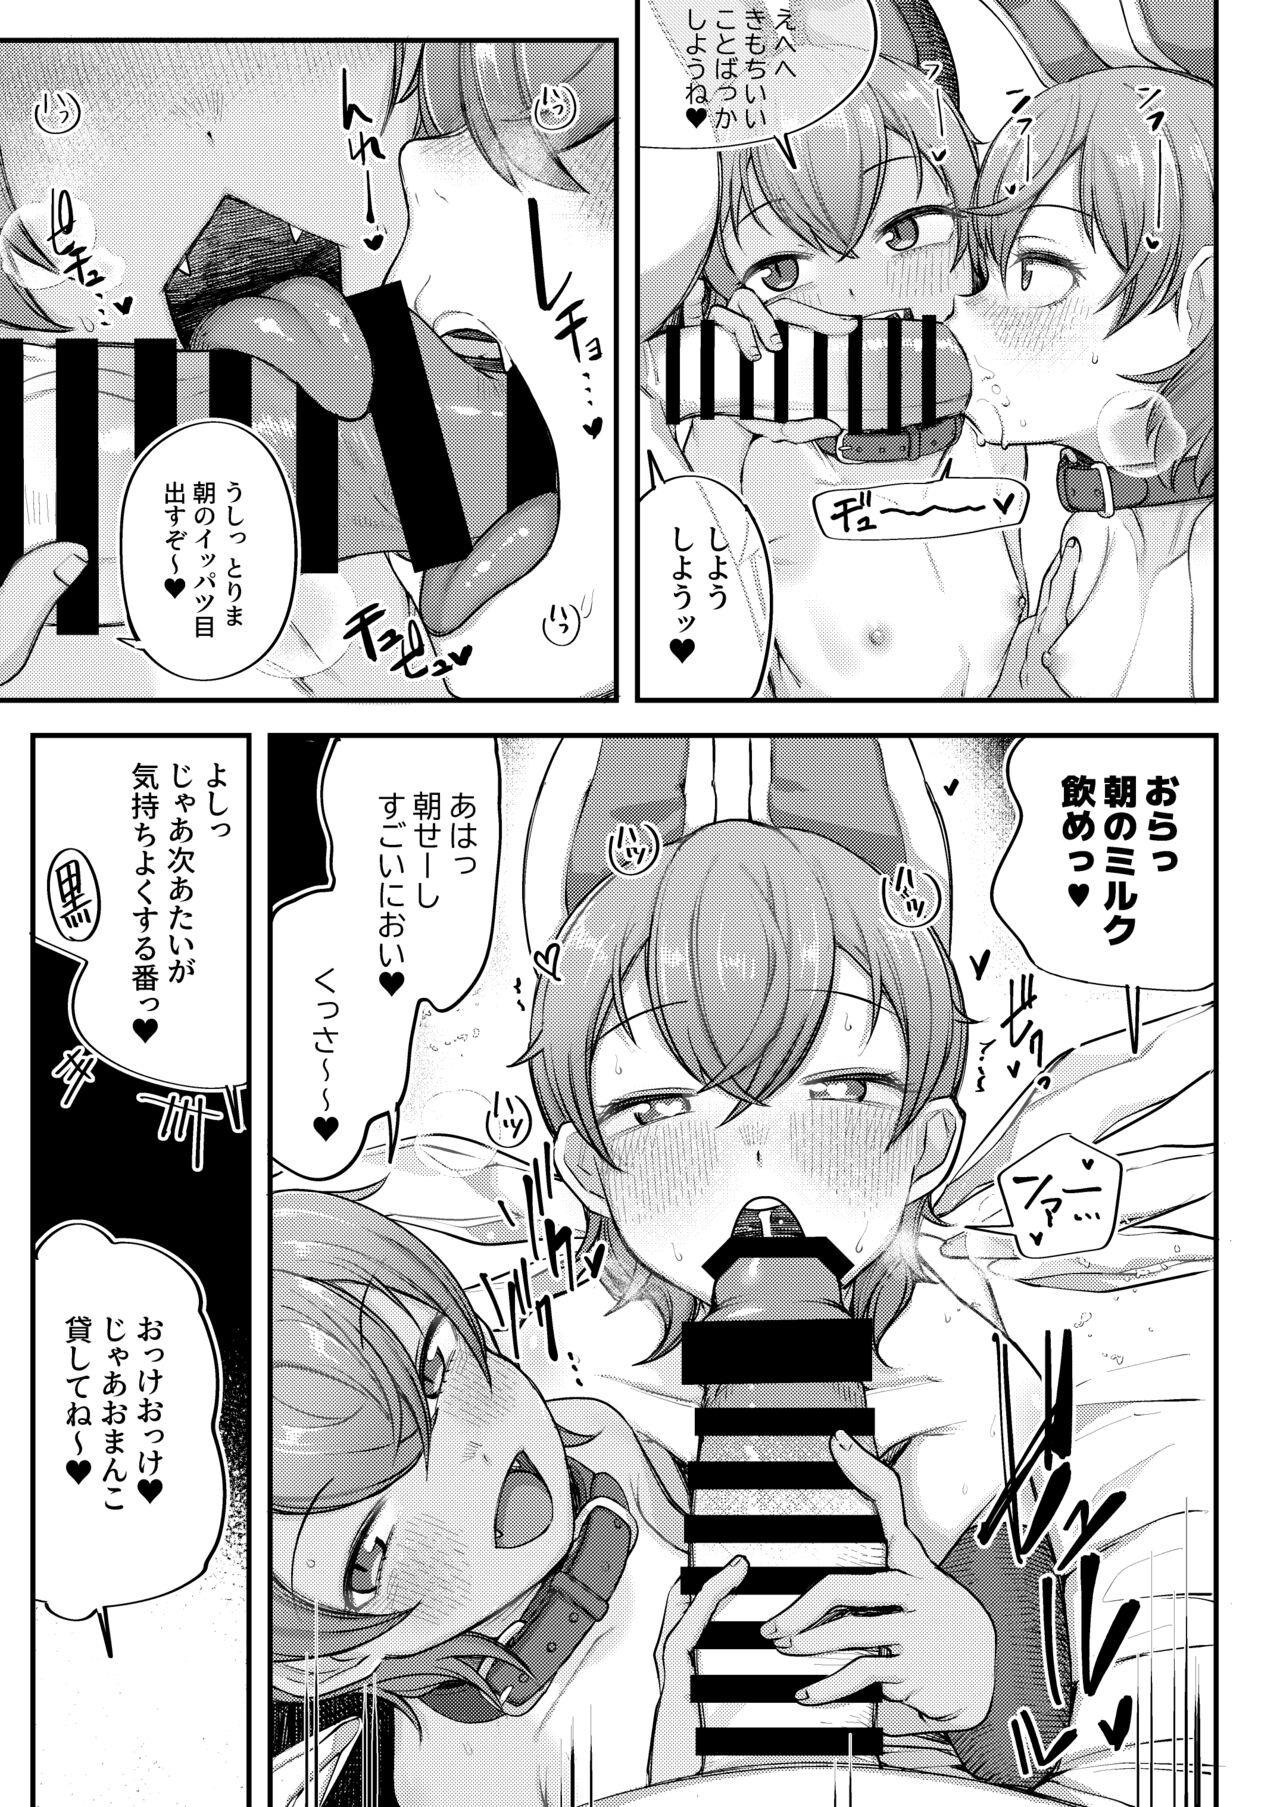 Butt Plug Cirno to Cirno - Touhou project Gaycum - Page 8